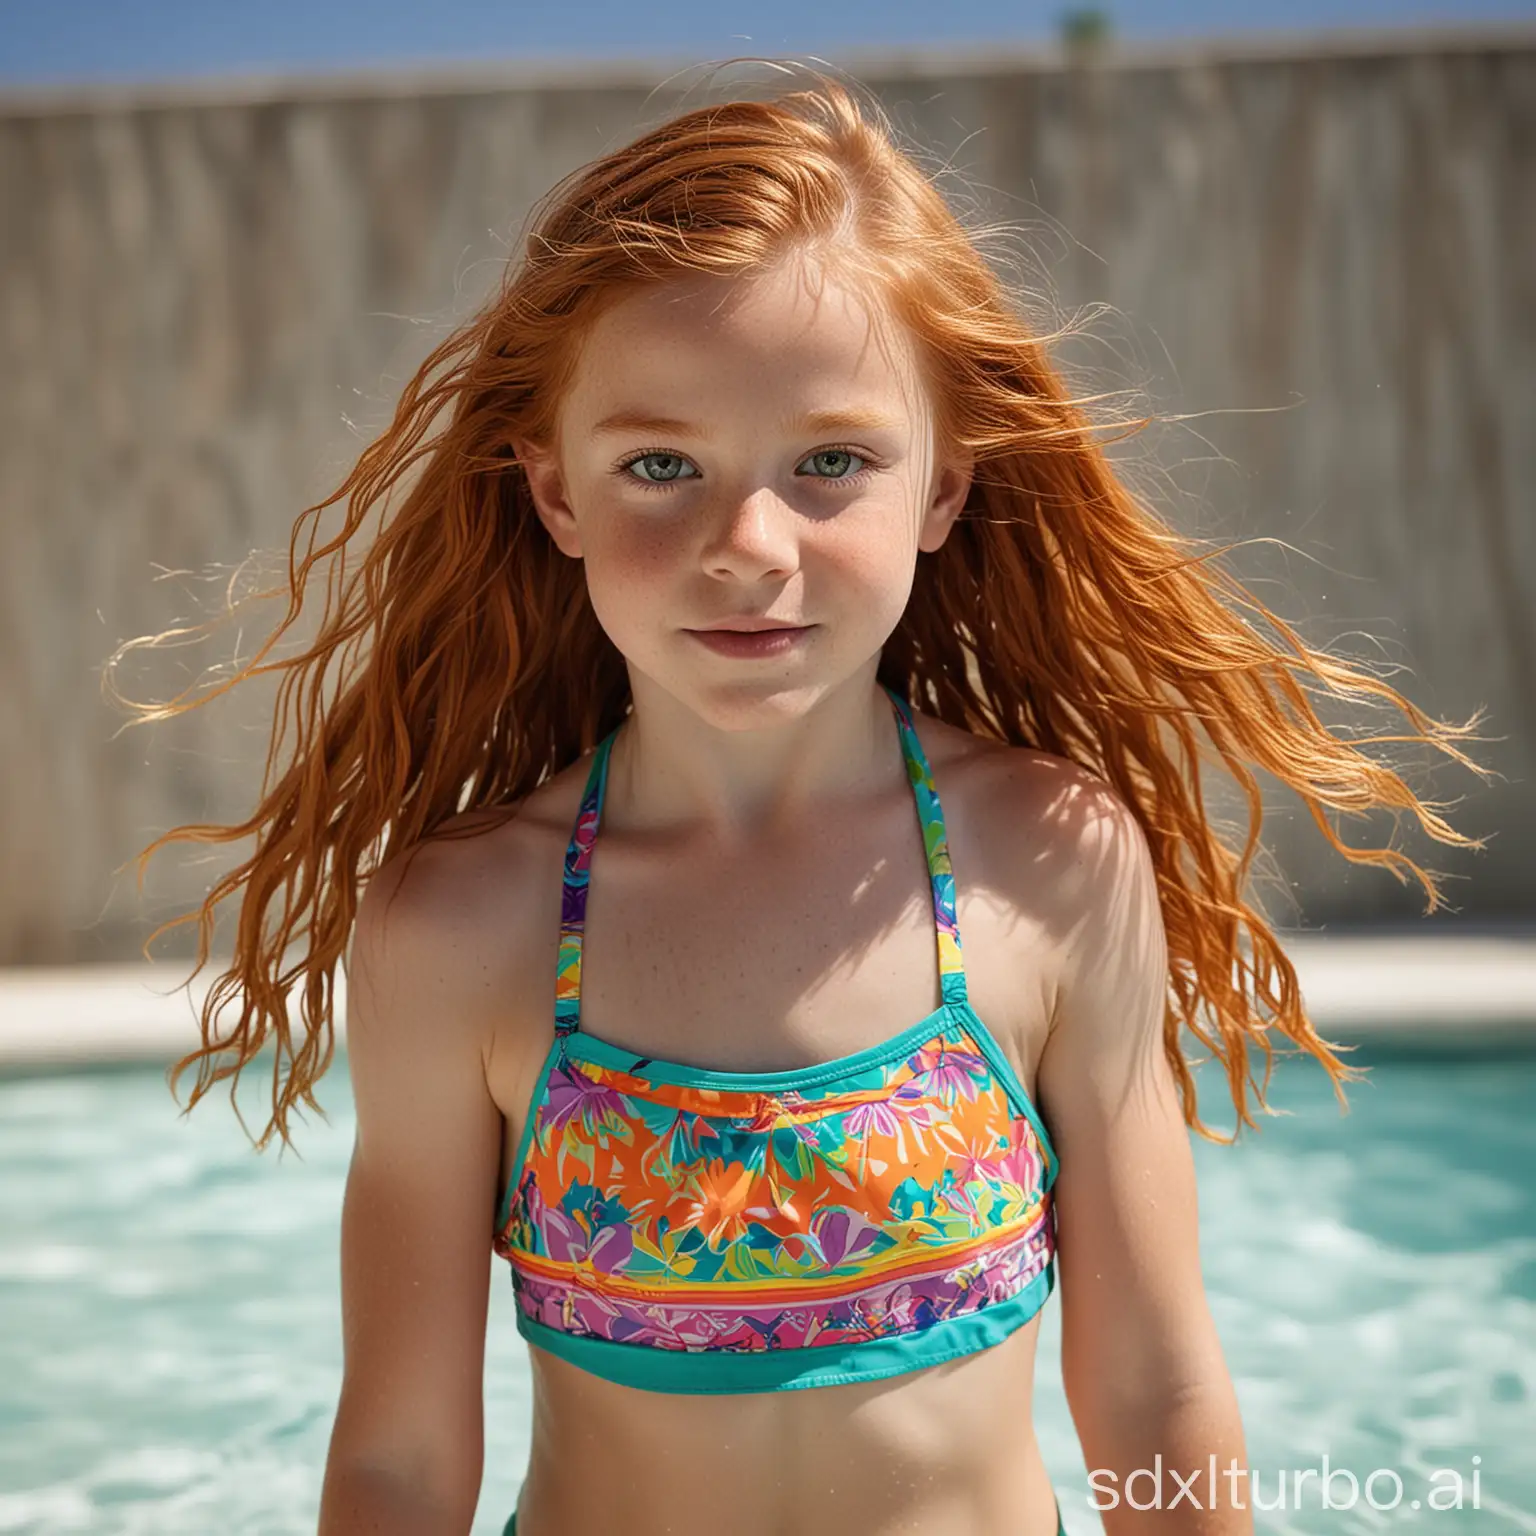 Vibrant-Bathing-Suit-Muscular-8YearOld-Girl-with-Long-Ginger-Hair-and-Green-Eyes